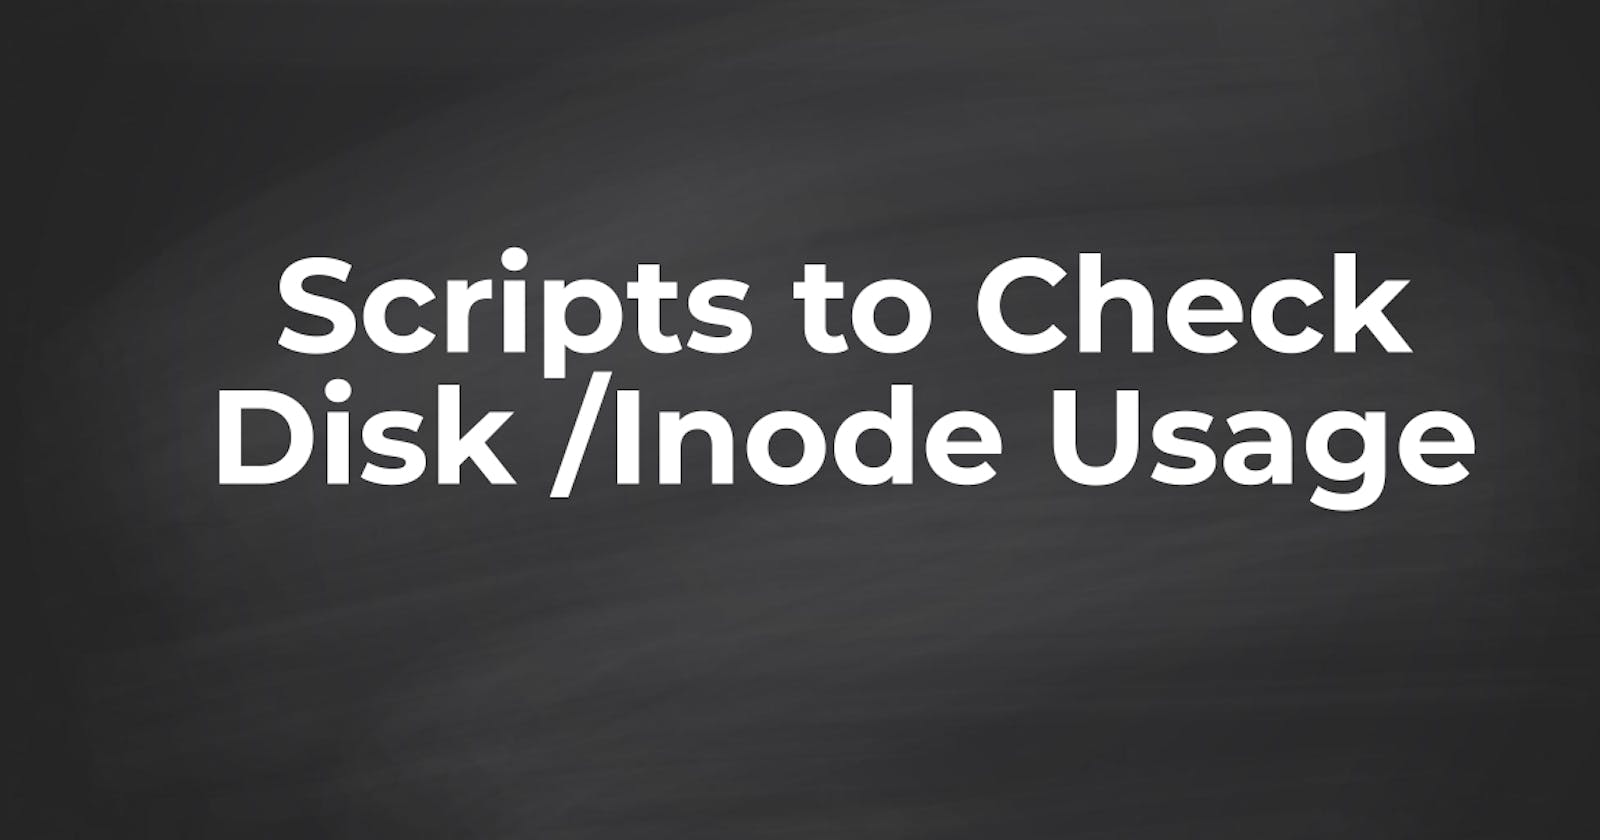 Scripts to check detailed Disk and Inode usage of your Linux server.